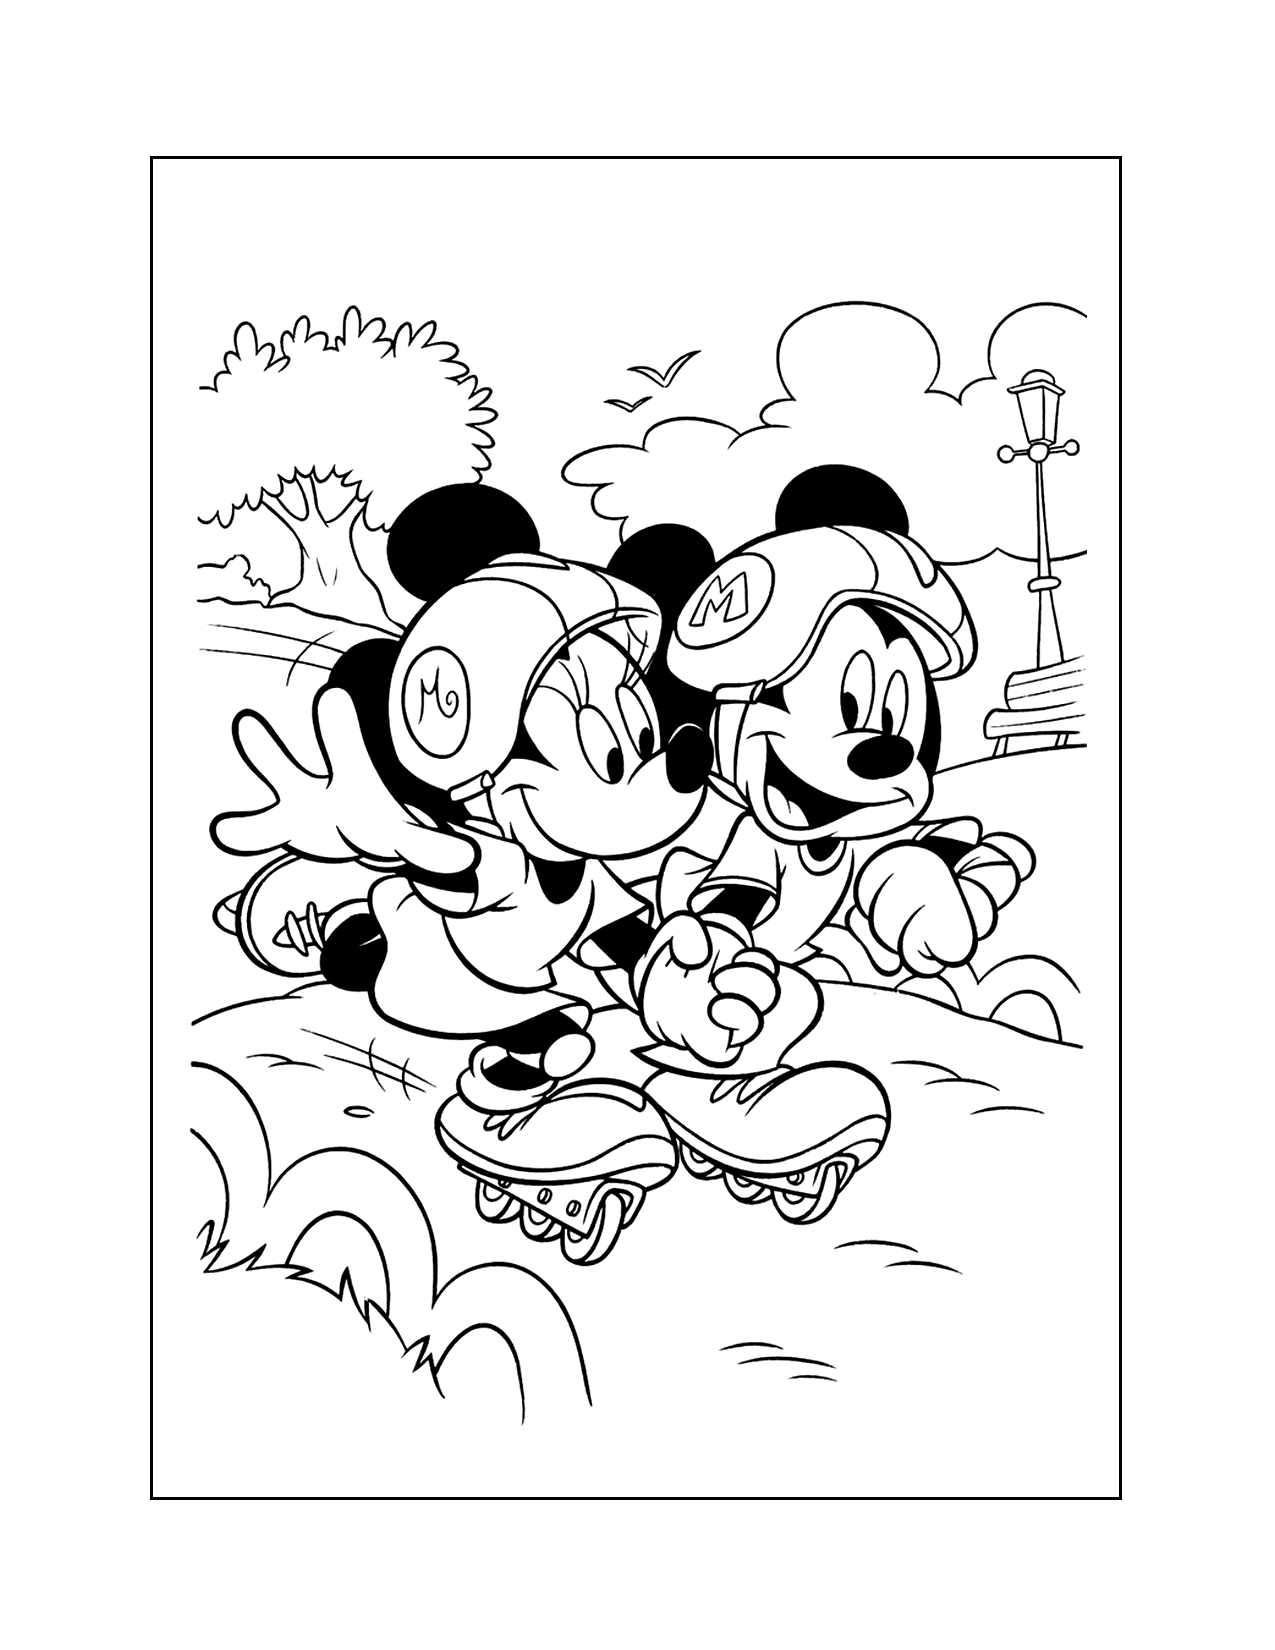 Mickey And Minney Roller Blading Coloring Page